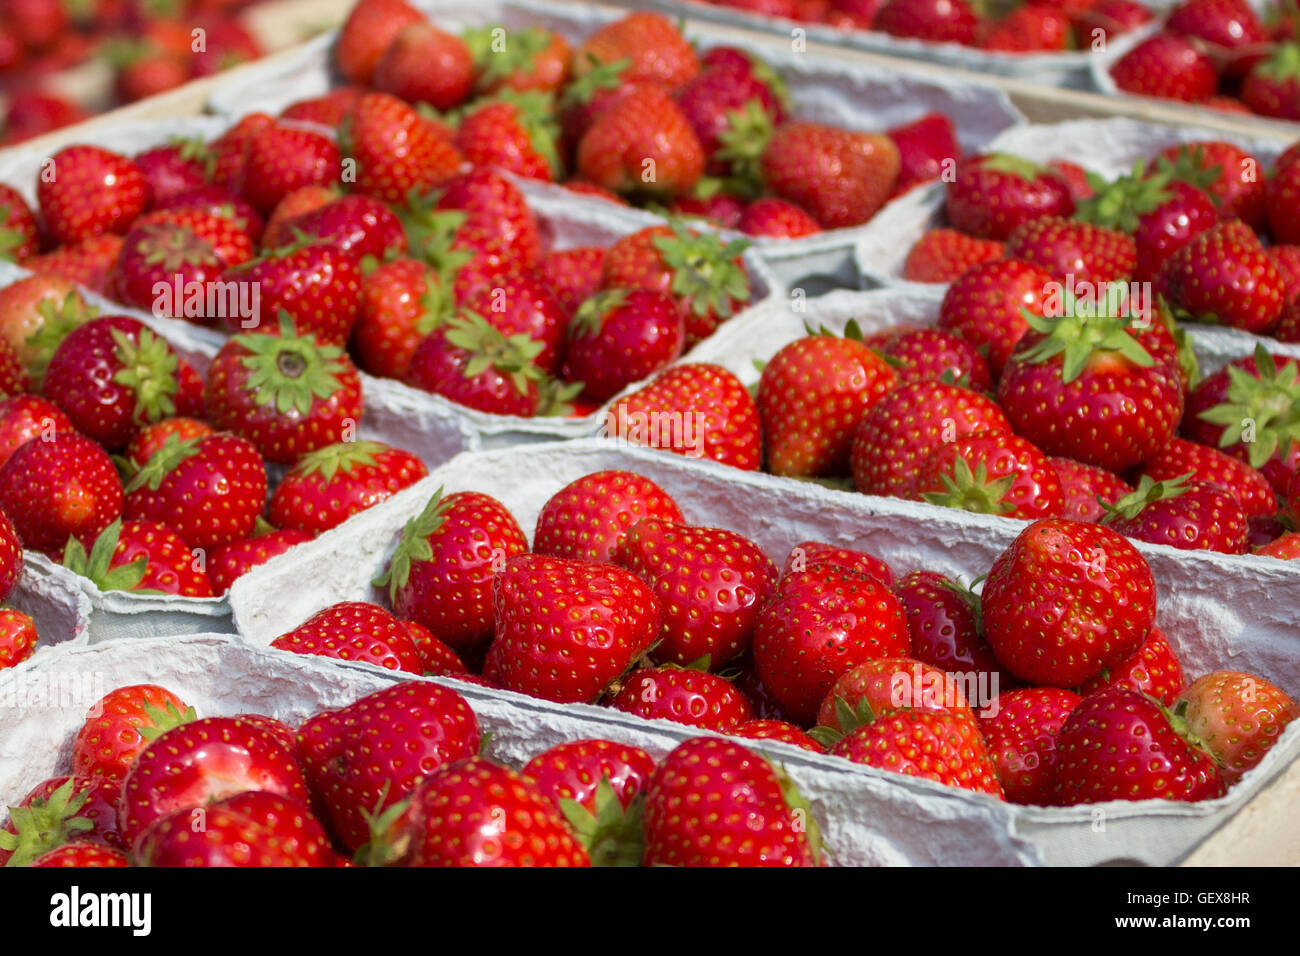 strawberries at market stand - strawberry fruits in boxes / baskets Stock Photo